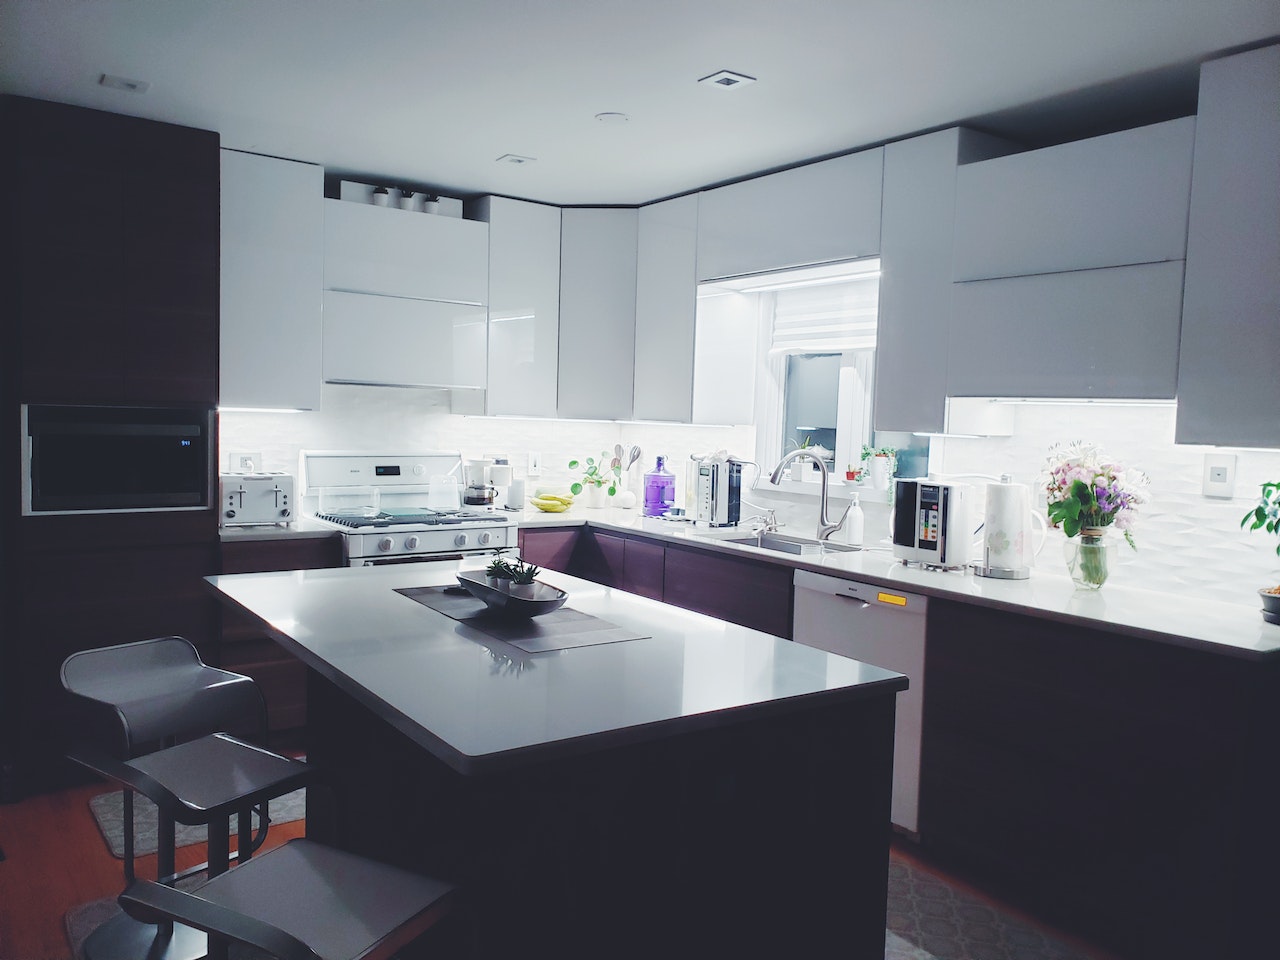 The Latest Innovations in Kitchen Design